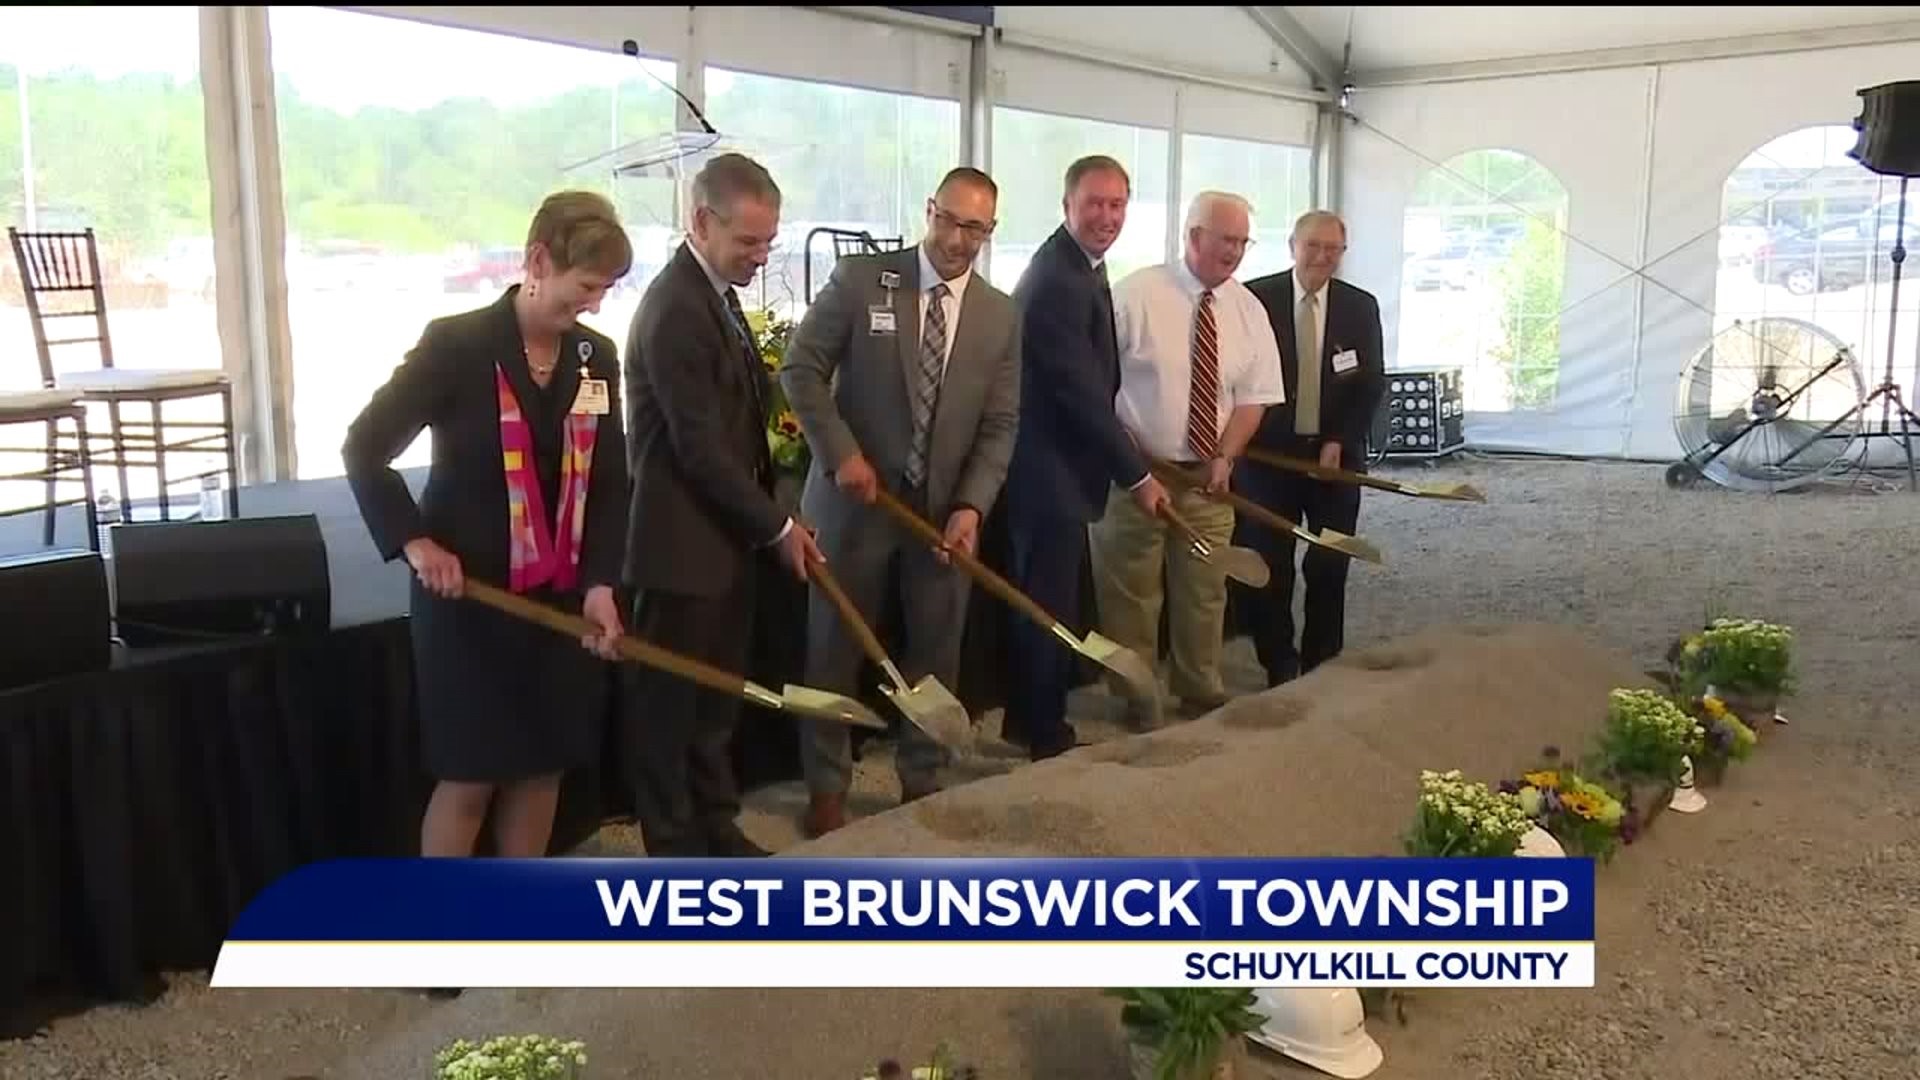 Breaking Ground for New Hospital in Schuylkill County